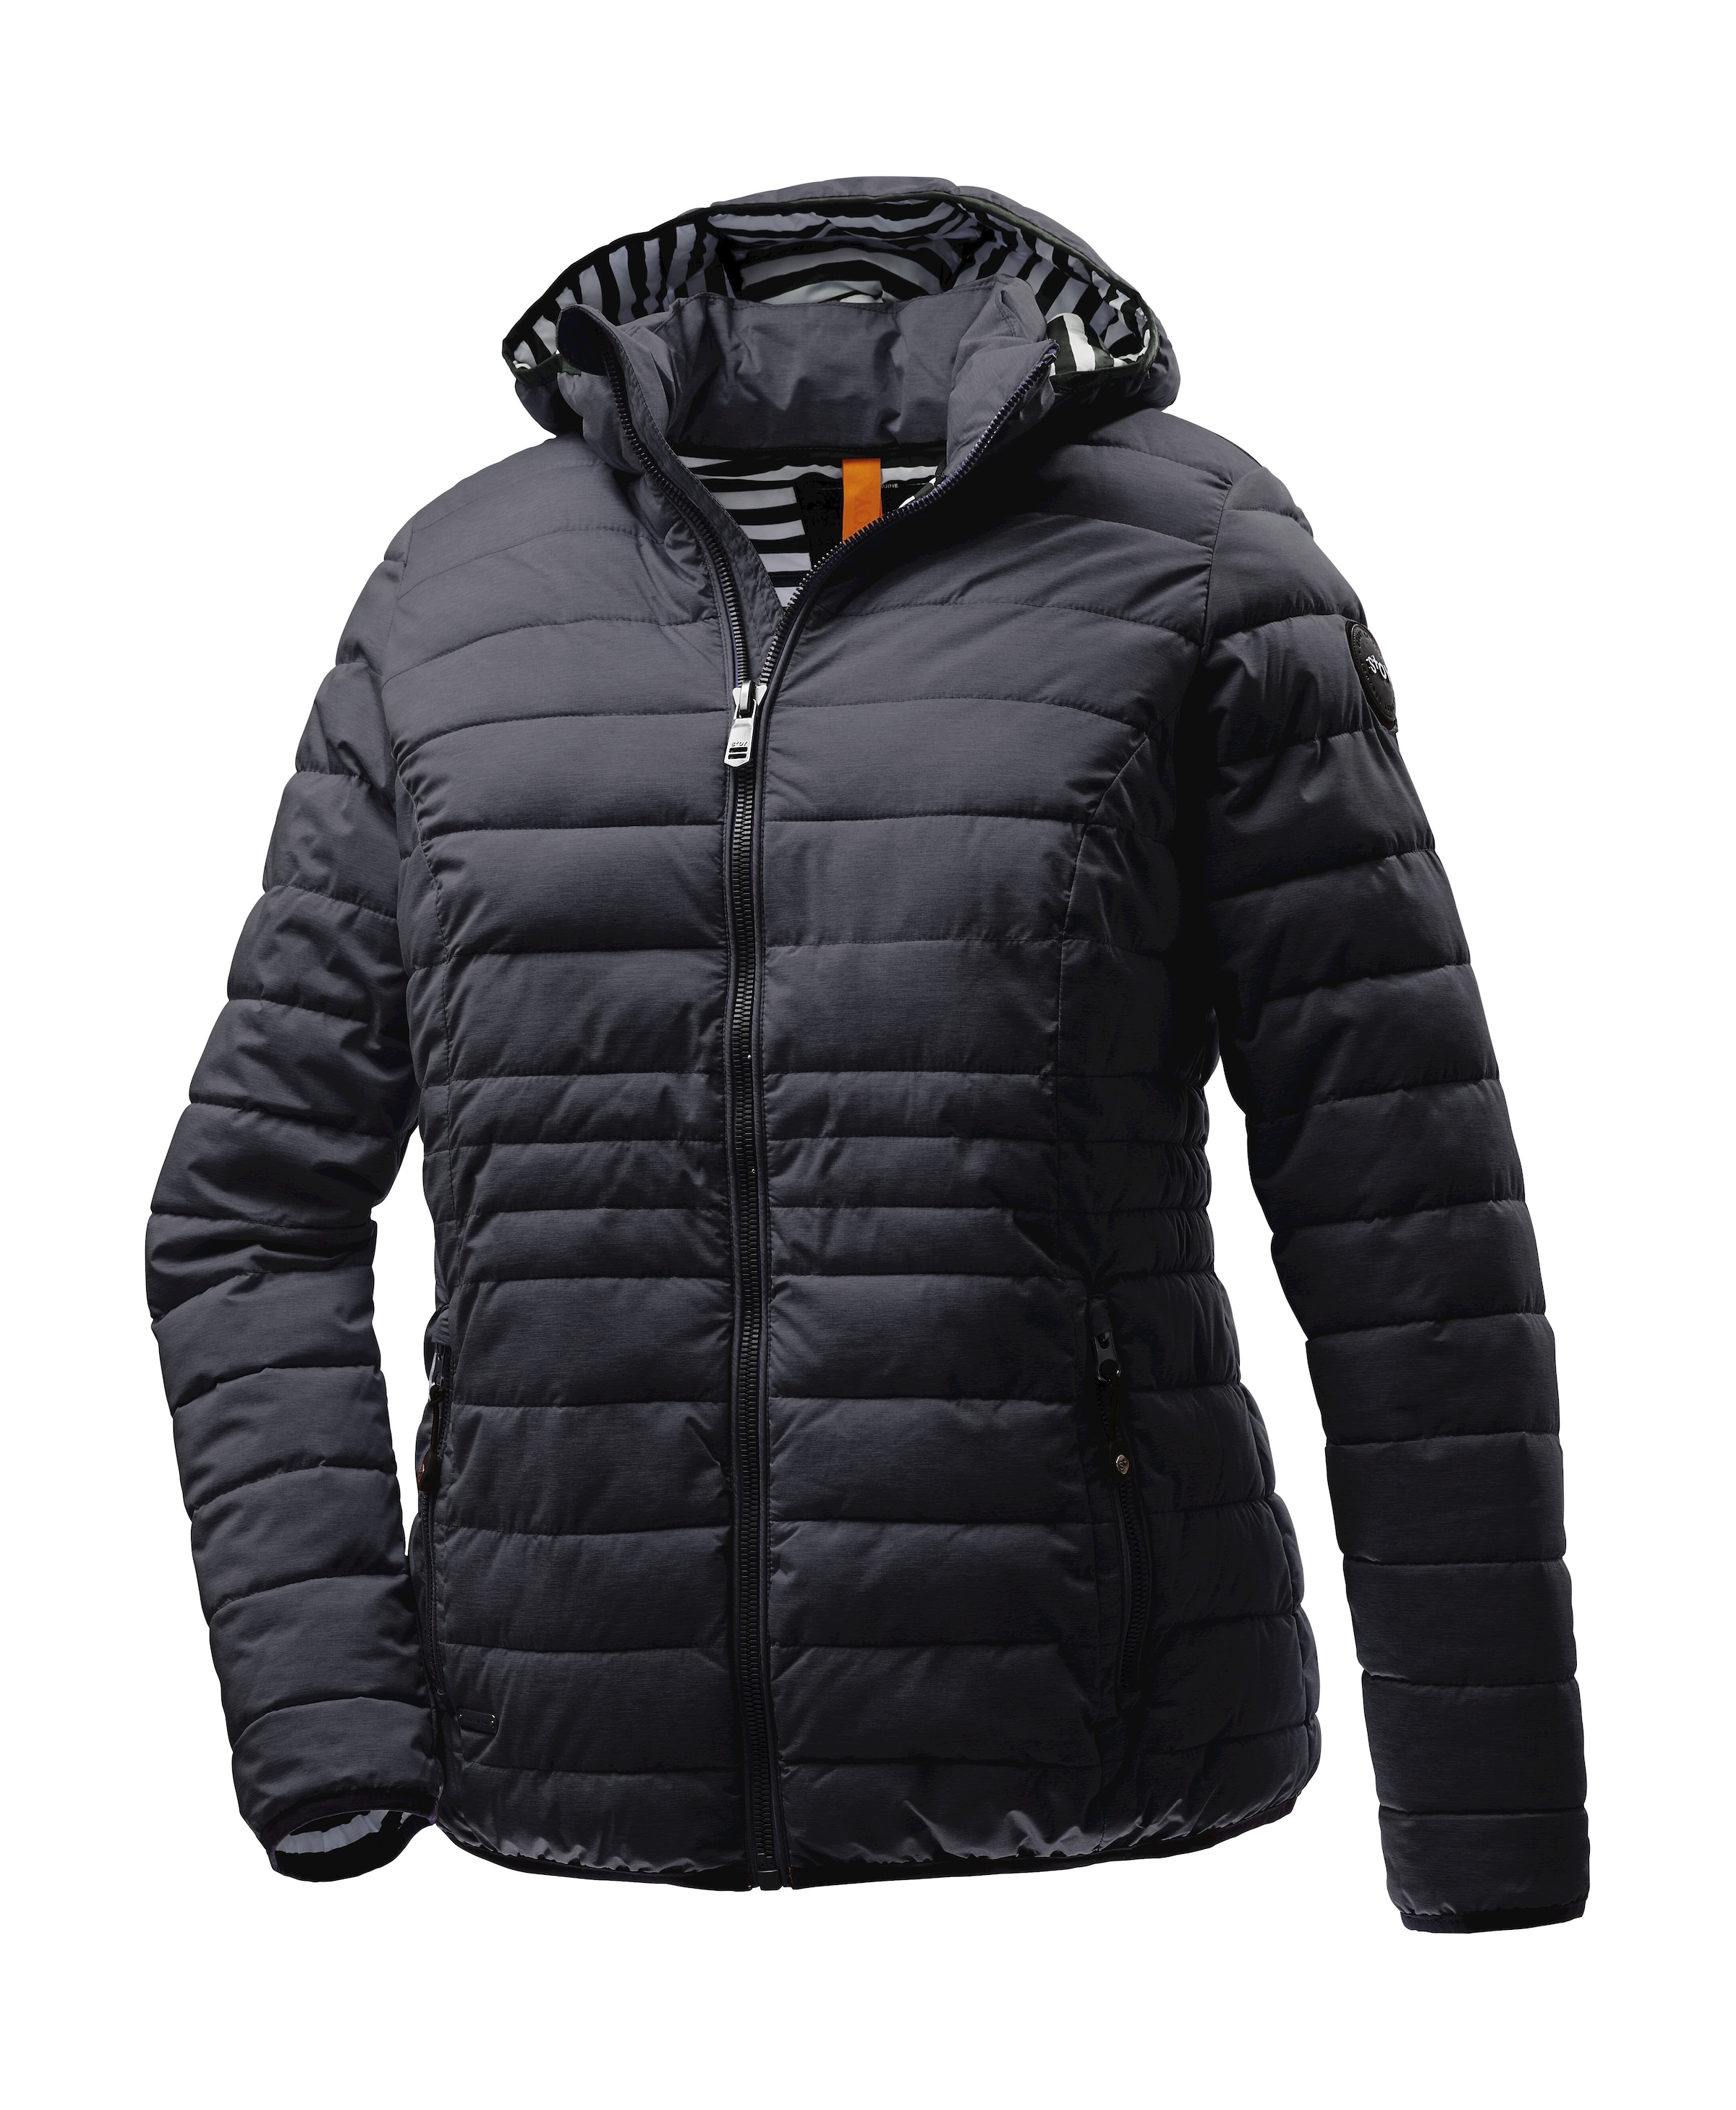 STOY Steppjacke »Thiant WMN Quilted JCKT A«